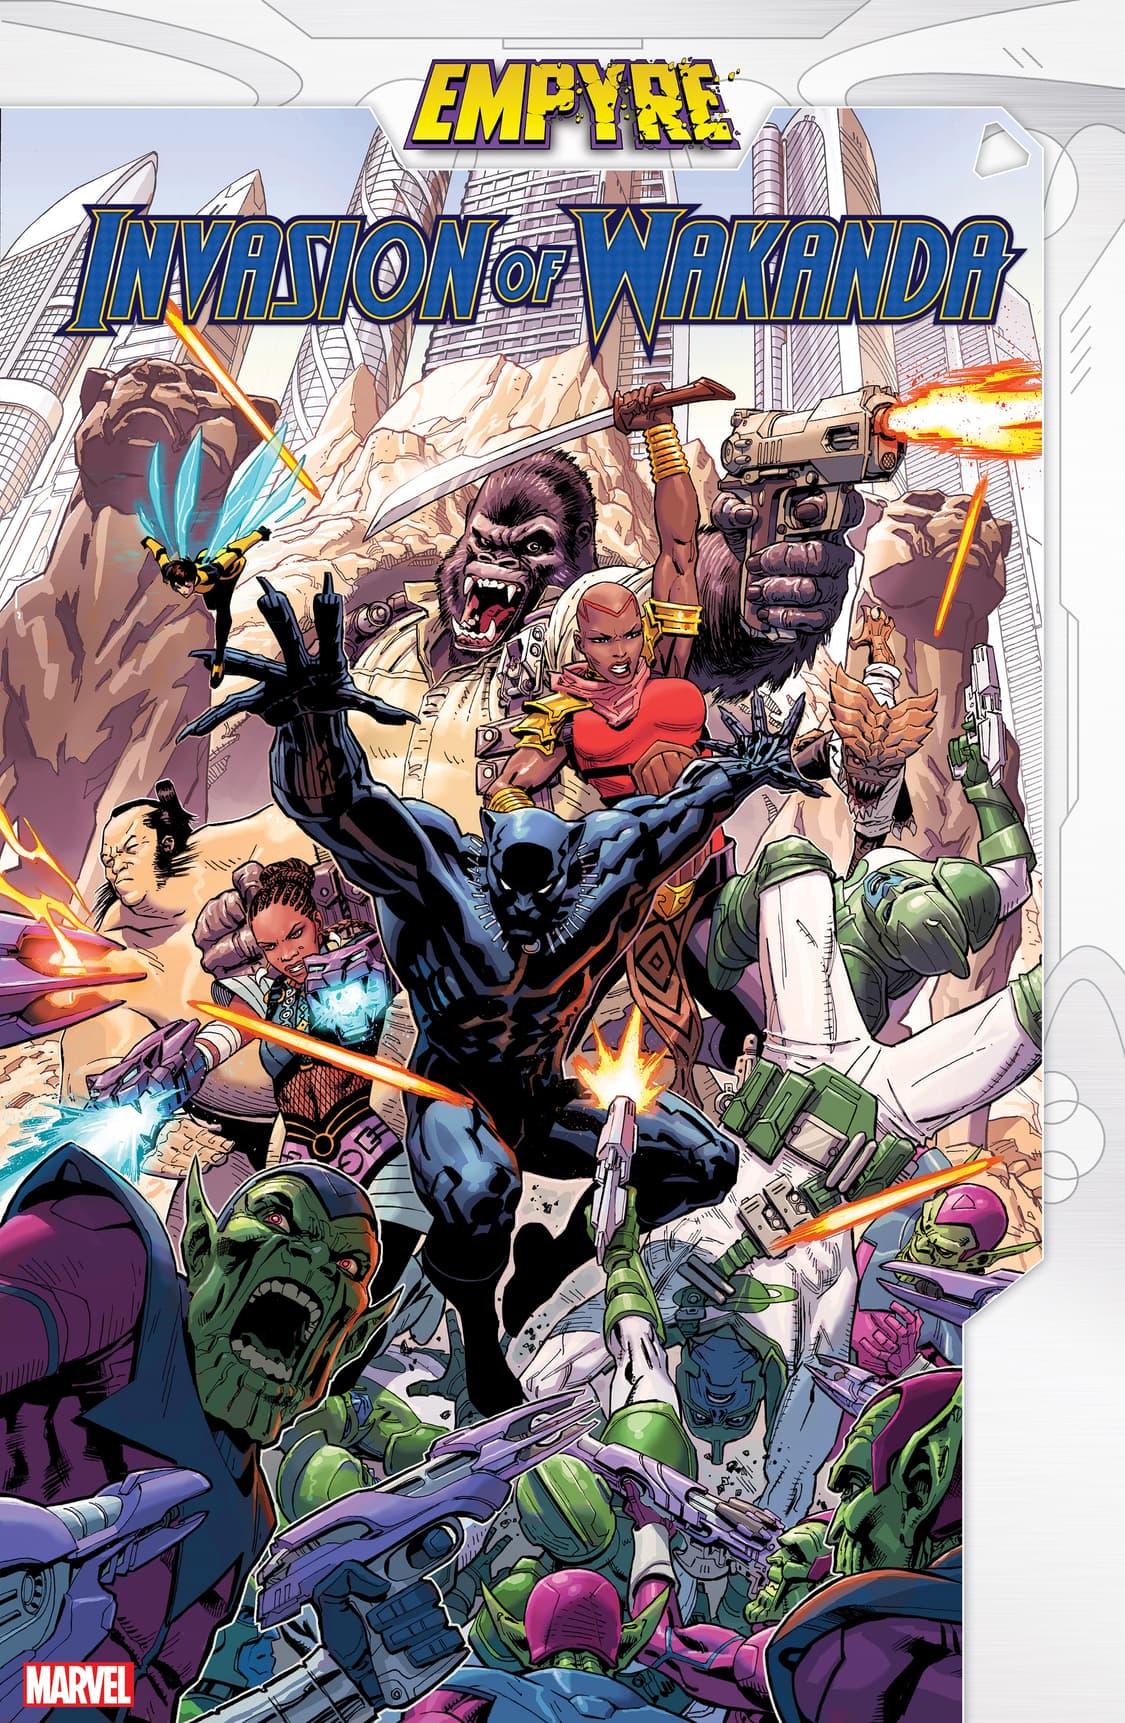 EMPYRE: THE INVASION OF WAKANDA #1 (of 3) Written by JIM ZUB with Art by LAN MEDINA and Cover by Dustin Weaver